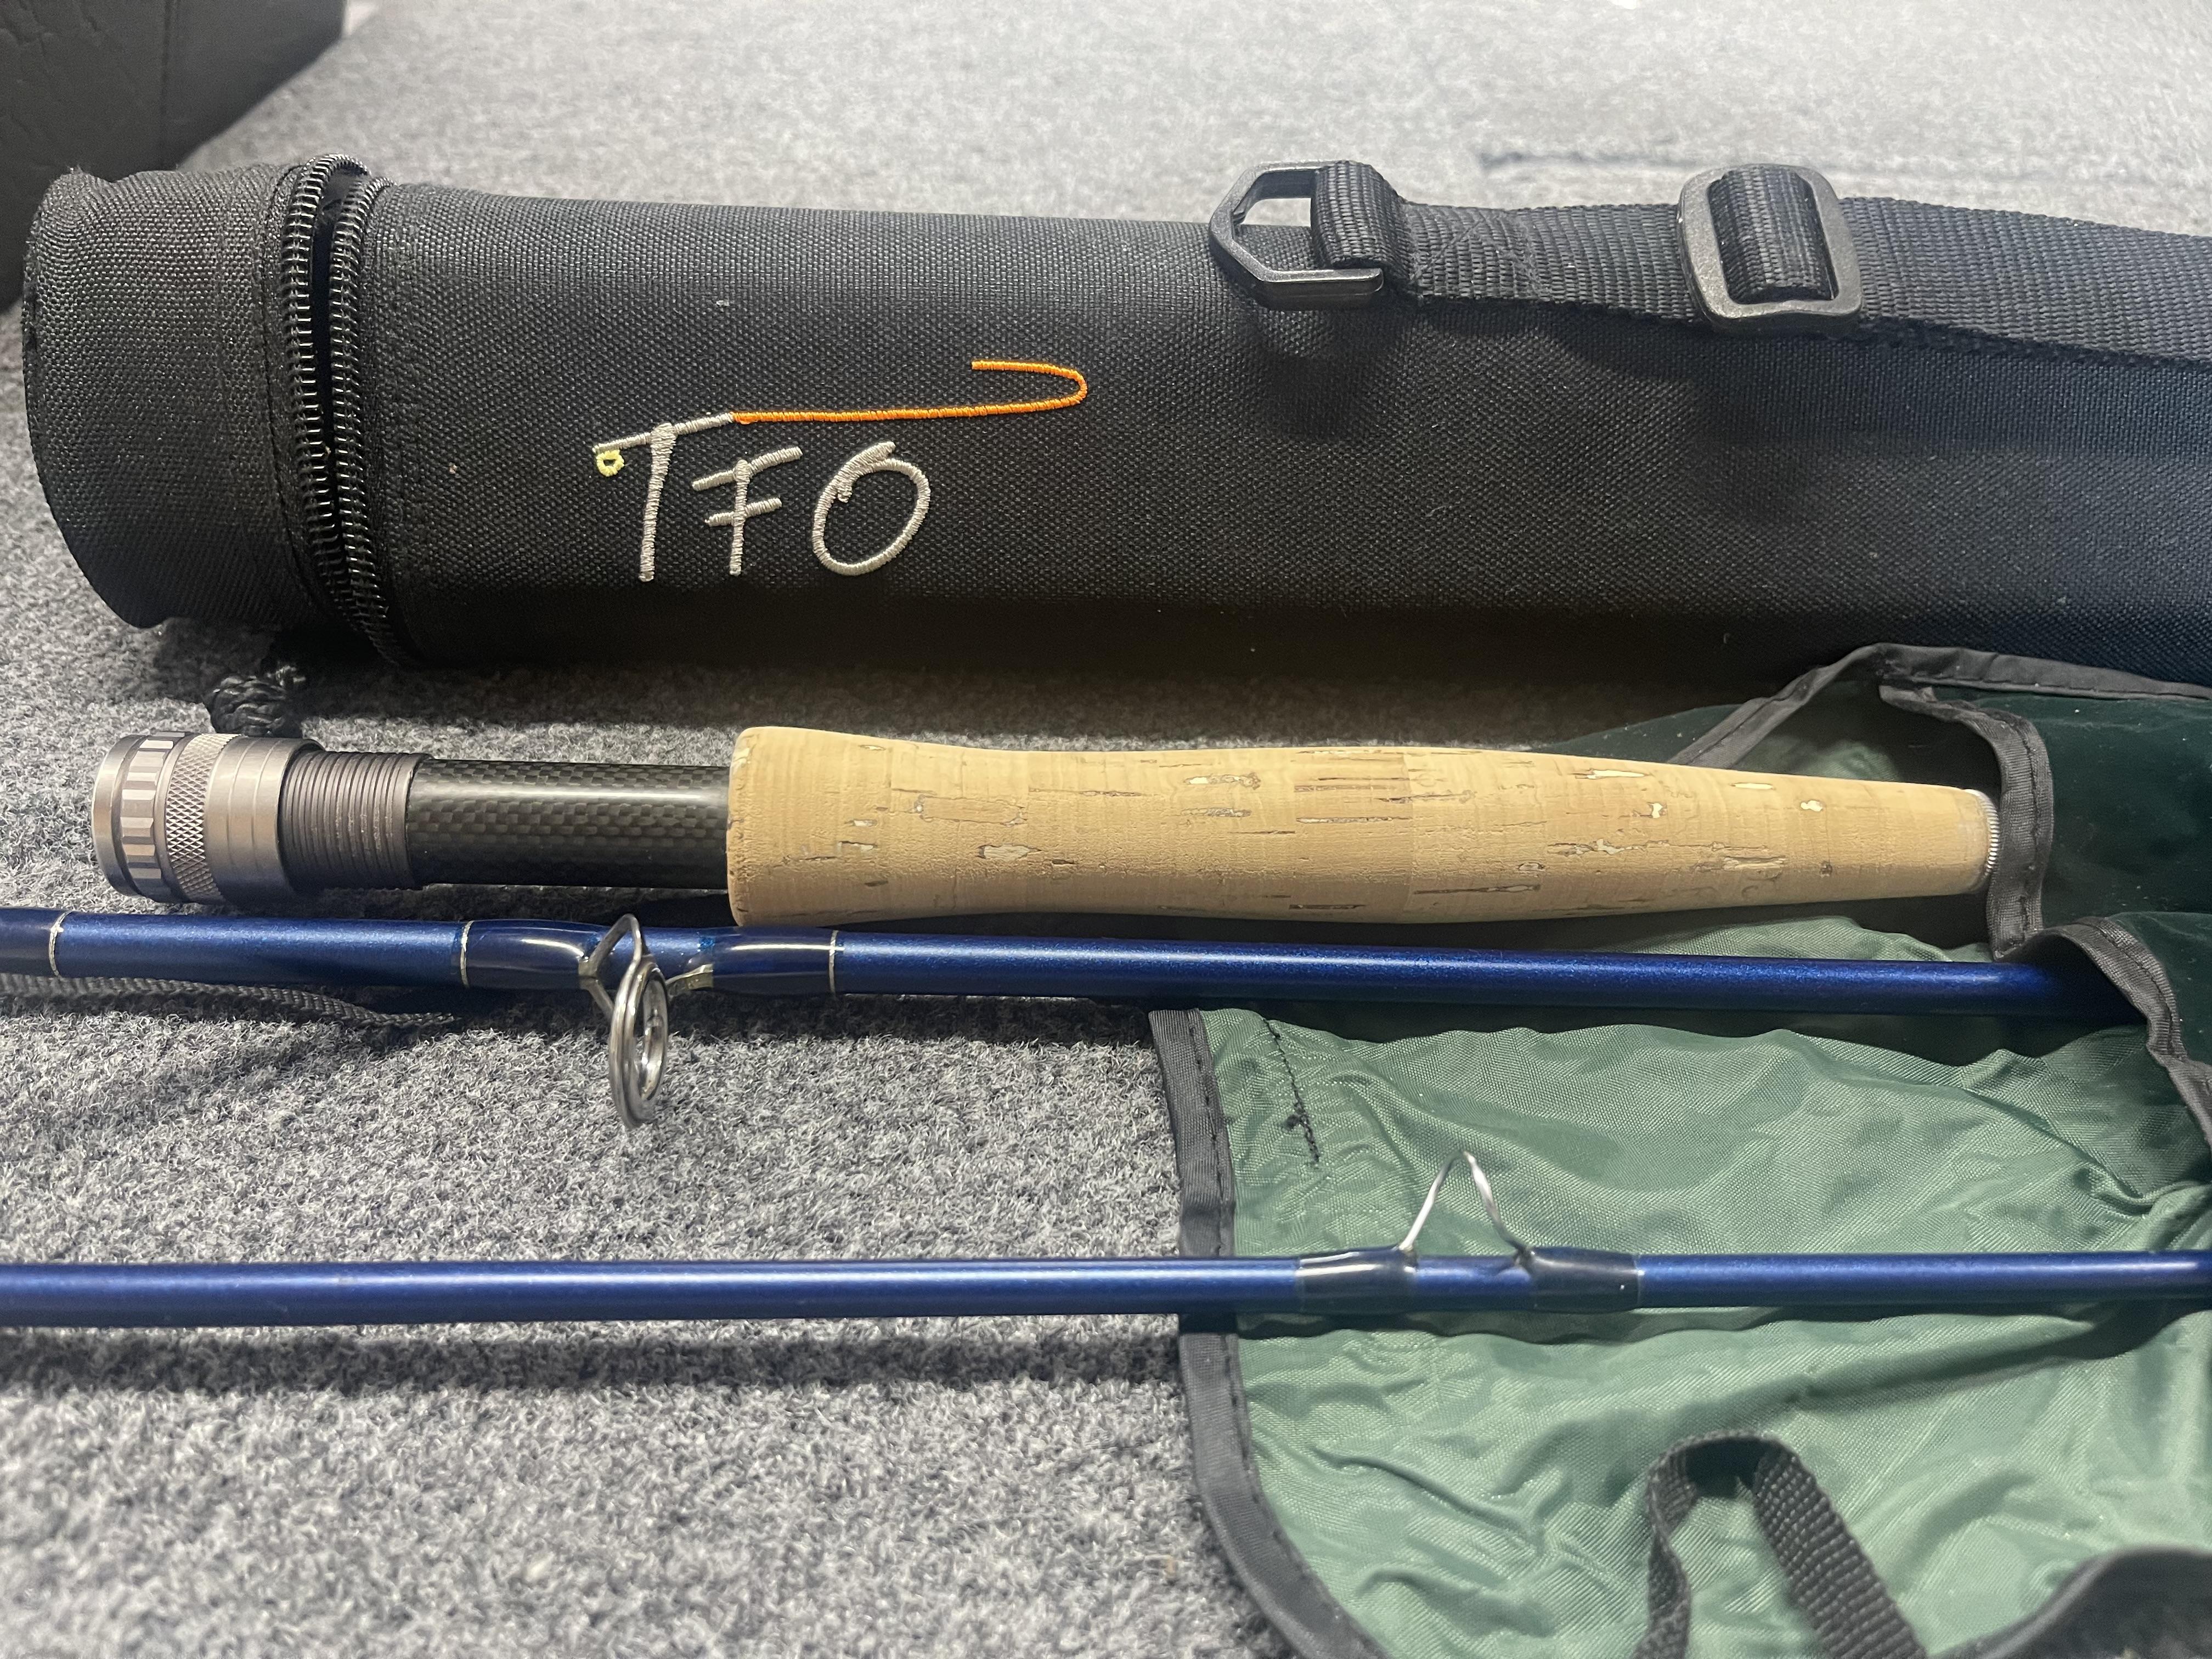 ORVIS EQUIP PART 2 RODS - Buy - Sell - Trade - OzarkAnglers.Com Forum